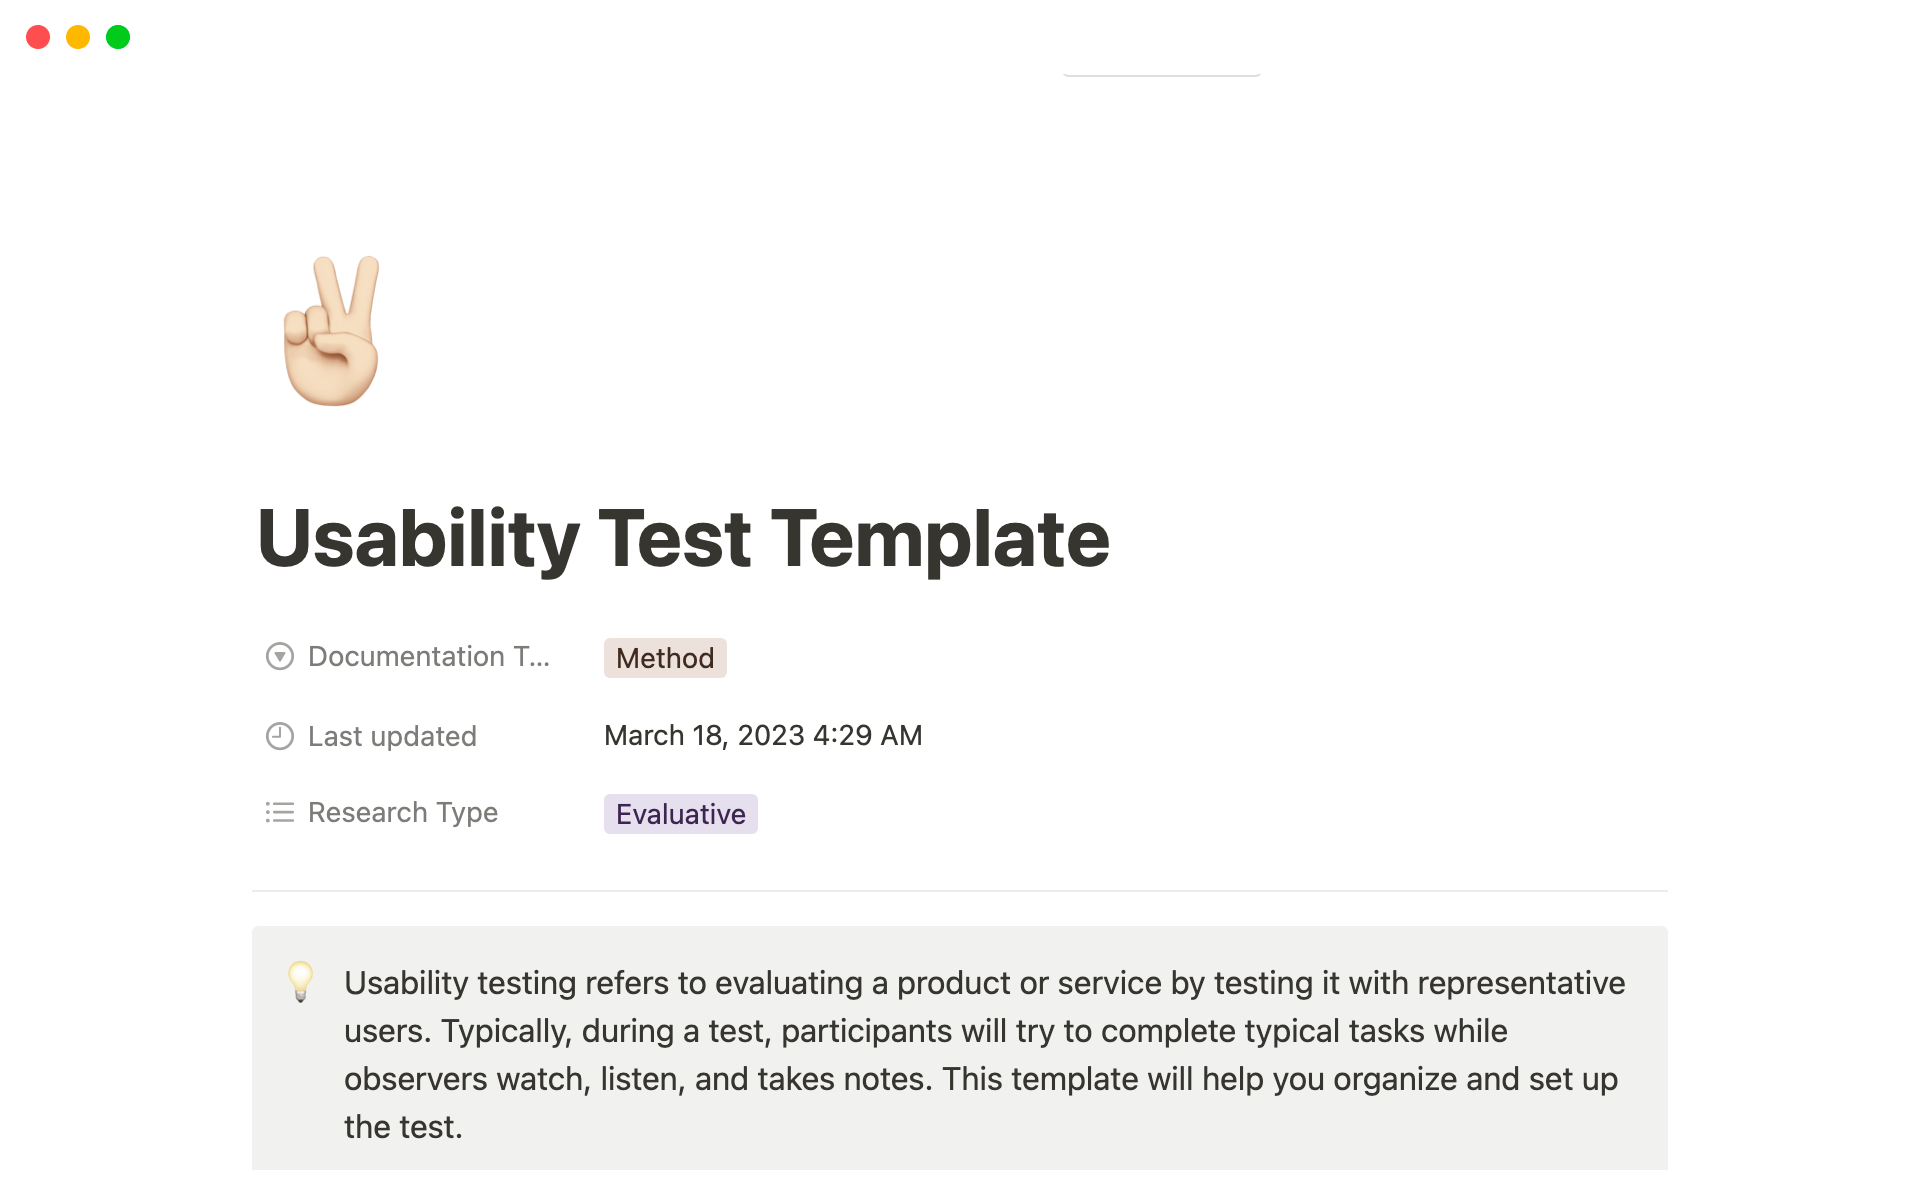 This template helps UX Researchers plan and set a usability test as part of their research project.